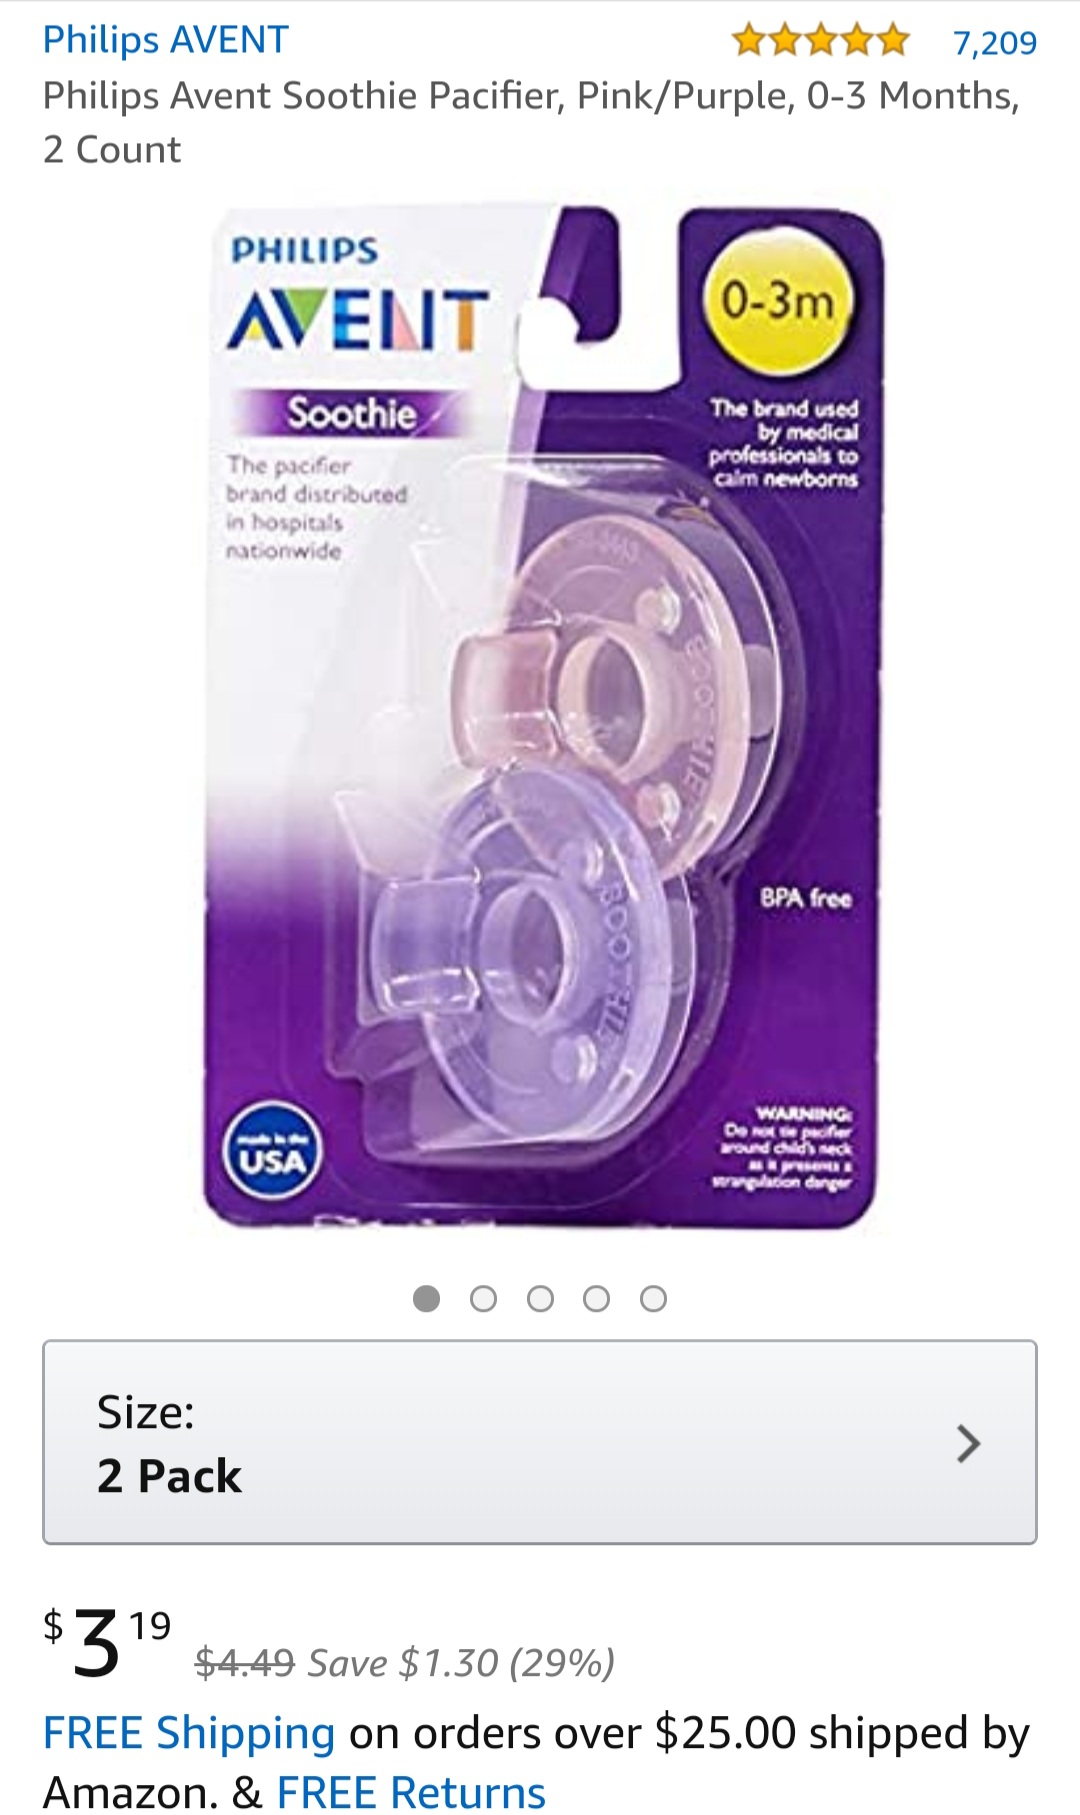 Philips Avent Soothie Pacifier安抚奶嘴, Pink/Purple, 0-3 Months, 2 Count